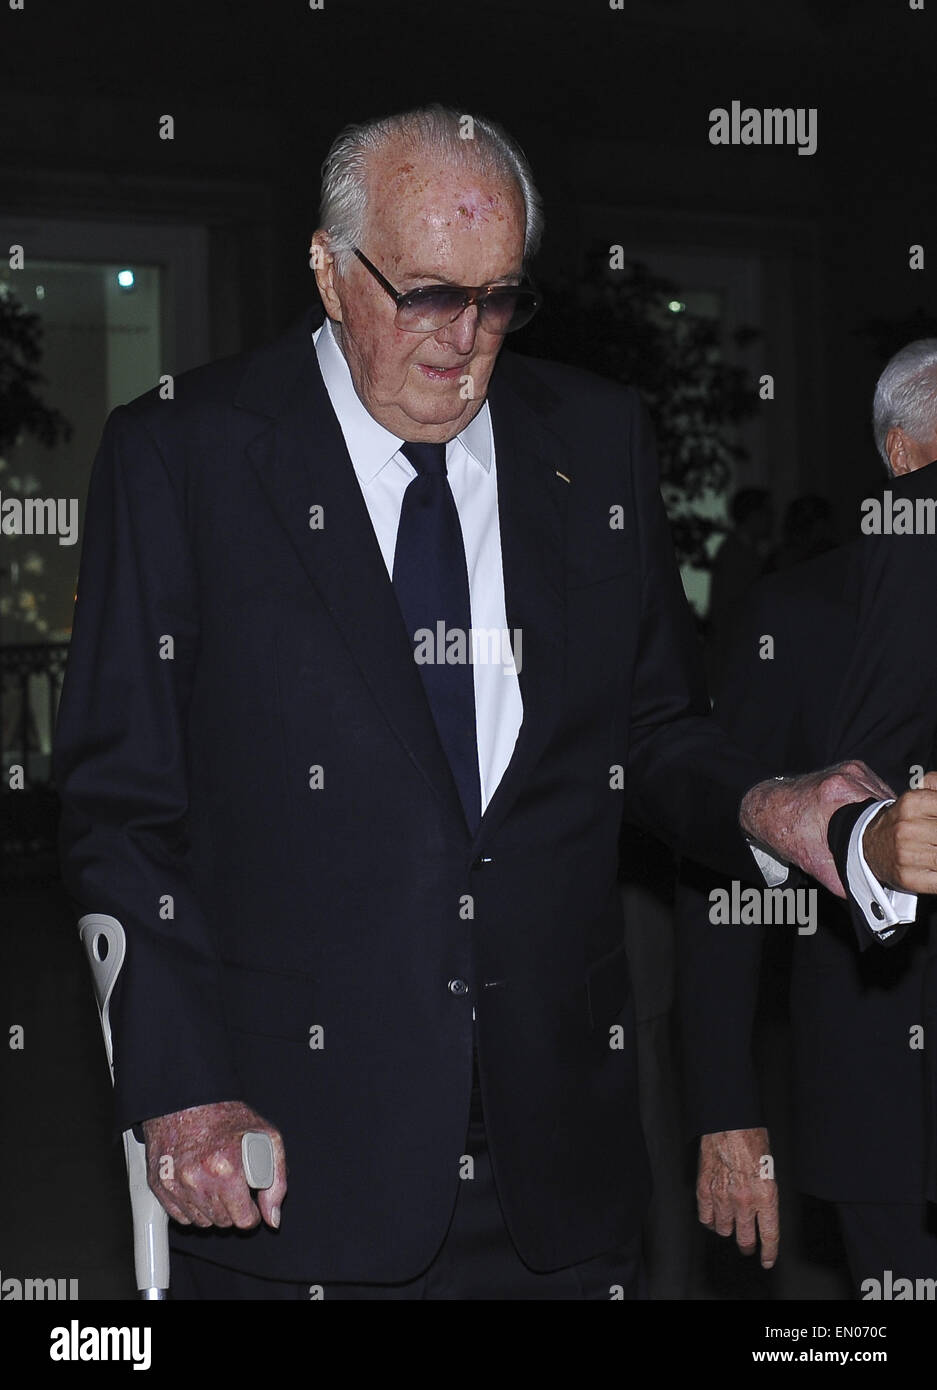 French fashion designer Hubert de Givenchy at the presentation of the exhibition 'Hubert de Givenchy' - an exhibiton of his fashion designs on display at the Thyssen-Bornemisza Museum in Madrid  Featuring: Hubert de Givenchy Where: Madrid, Spain When: 20 Oct 2014 Stock Photo